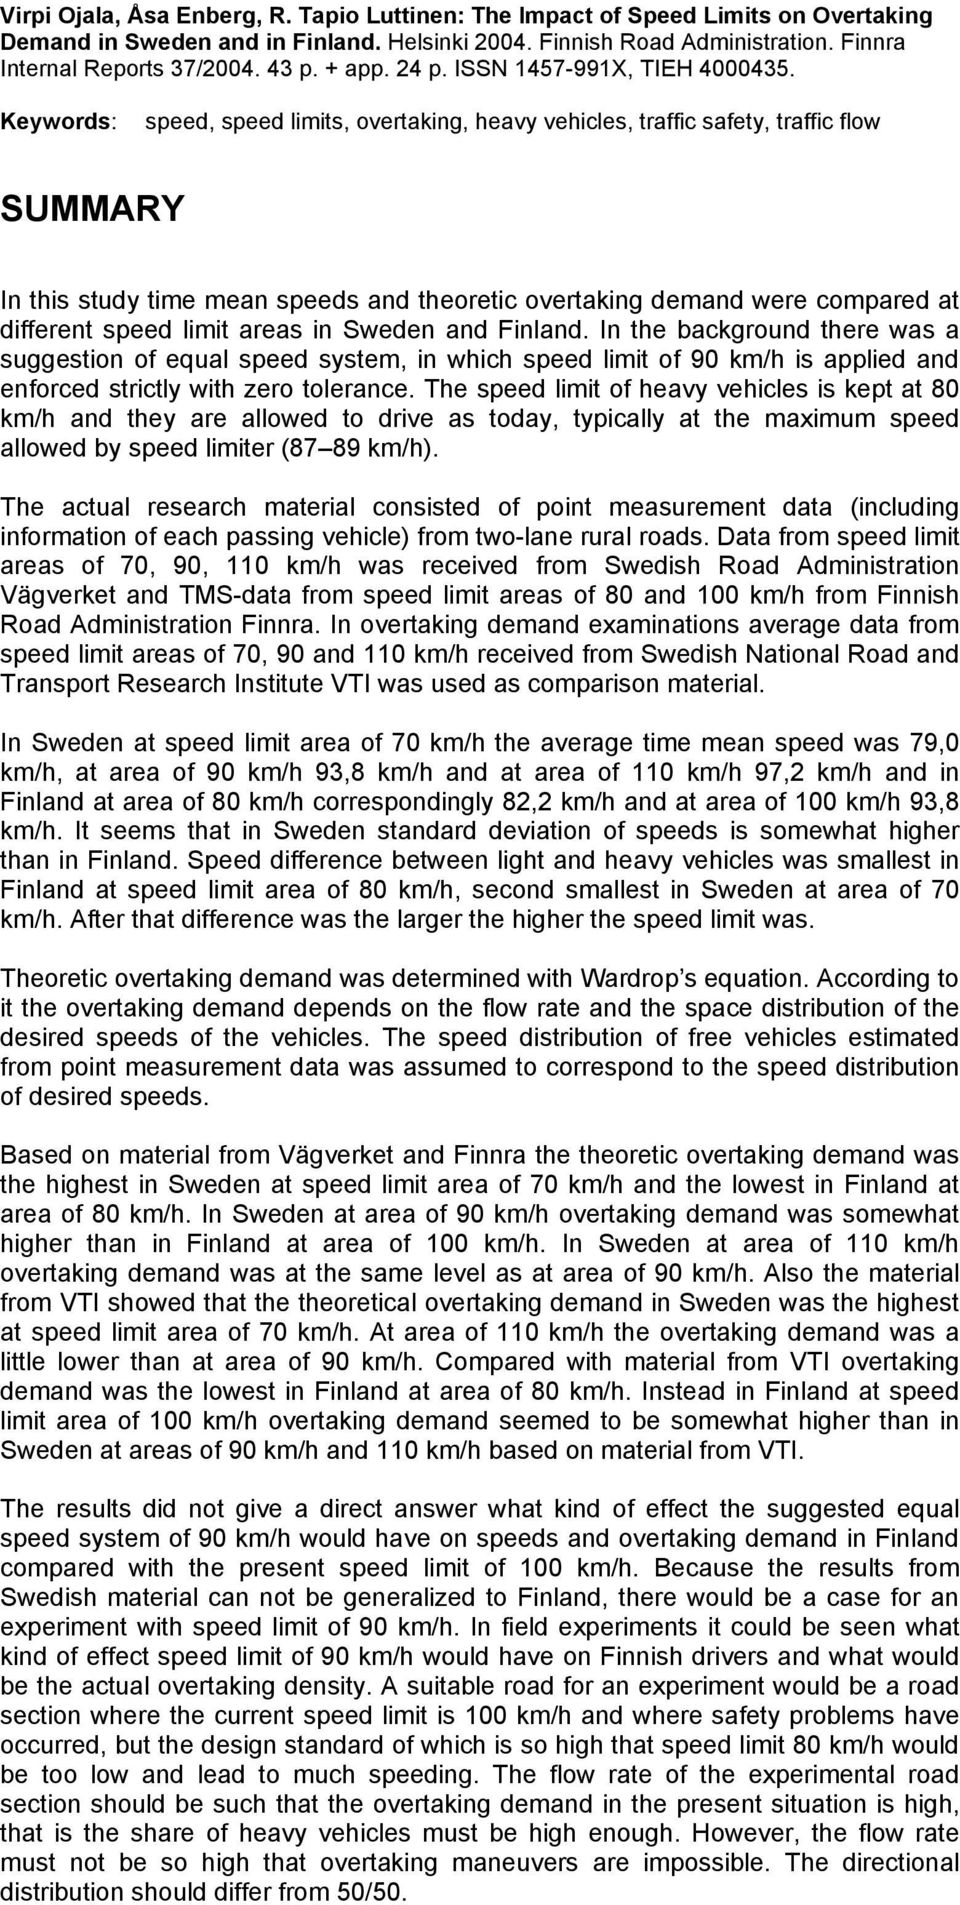 Keywords: speed, speed limits, overtaking, heavy vehicles, traffic safety, traffic flow SUMMARY In this study time mean speeds and theoretic overtaking demand were compared at different speed limit